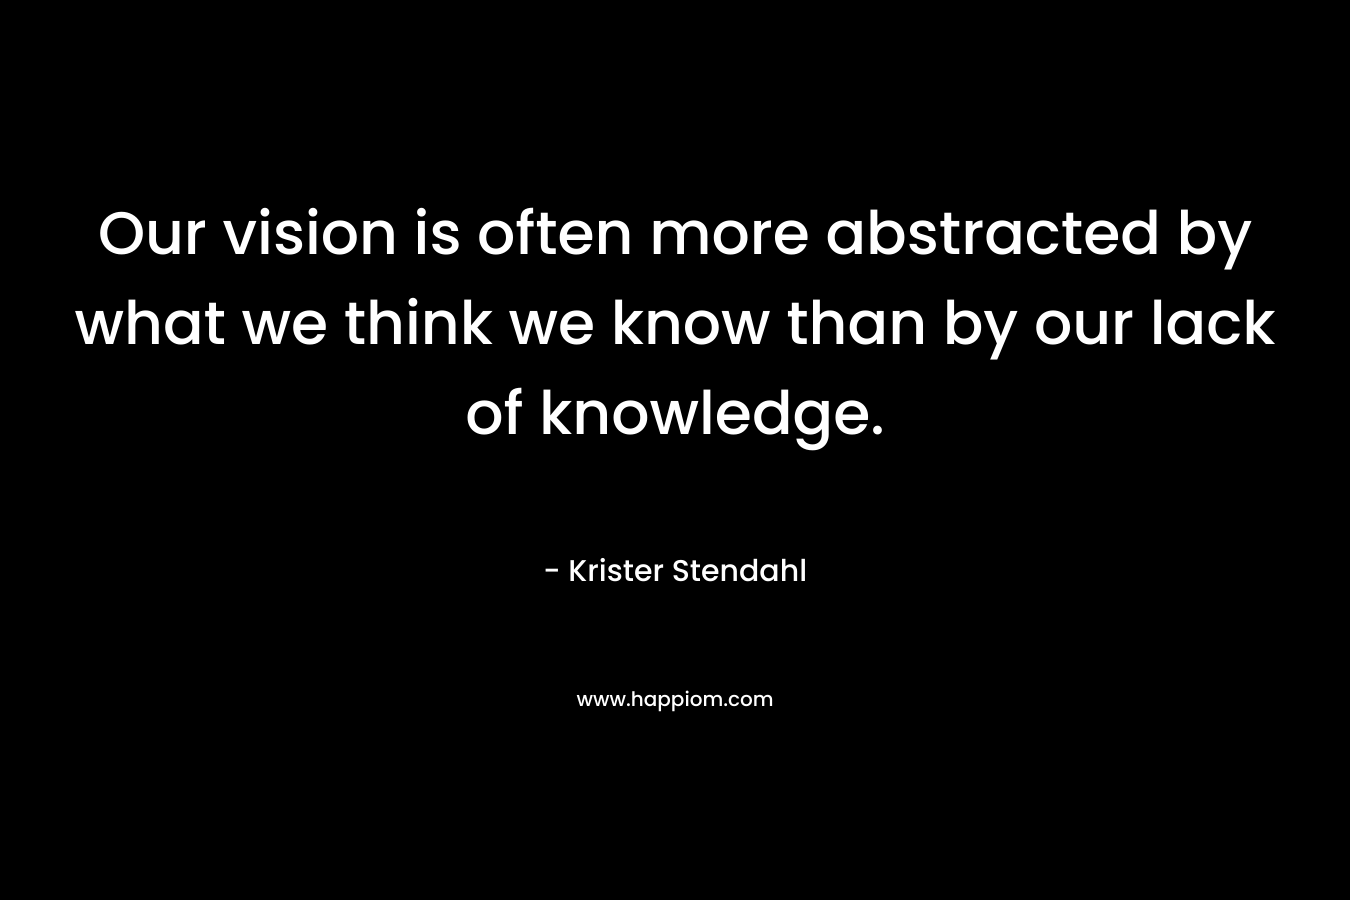 Our vision is often more abstracted by what we think we know than by our lack of knowledge. – Krister Stendahl